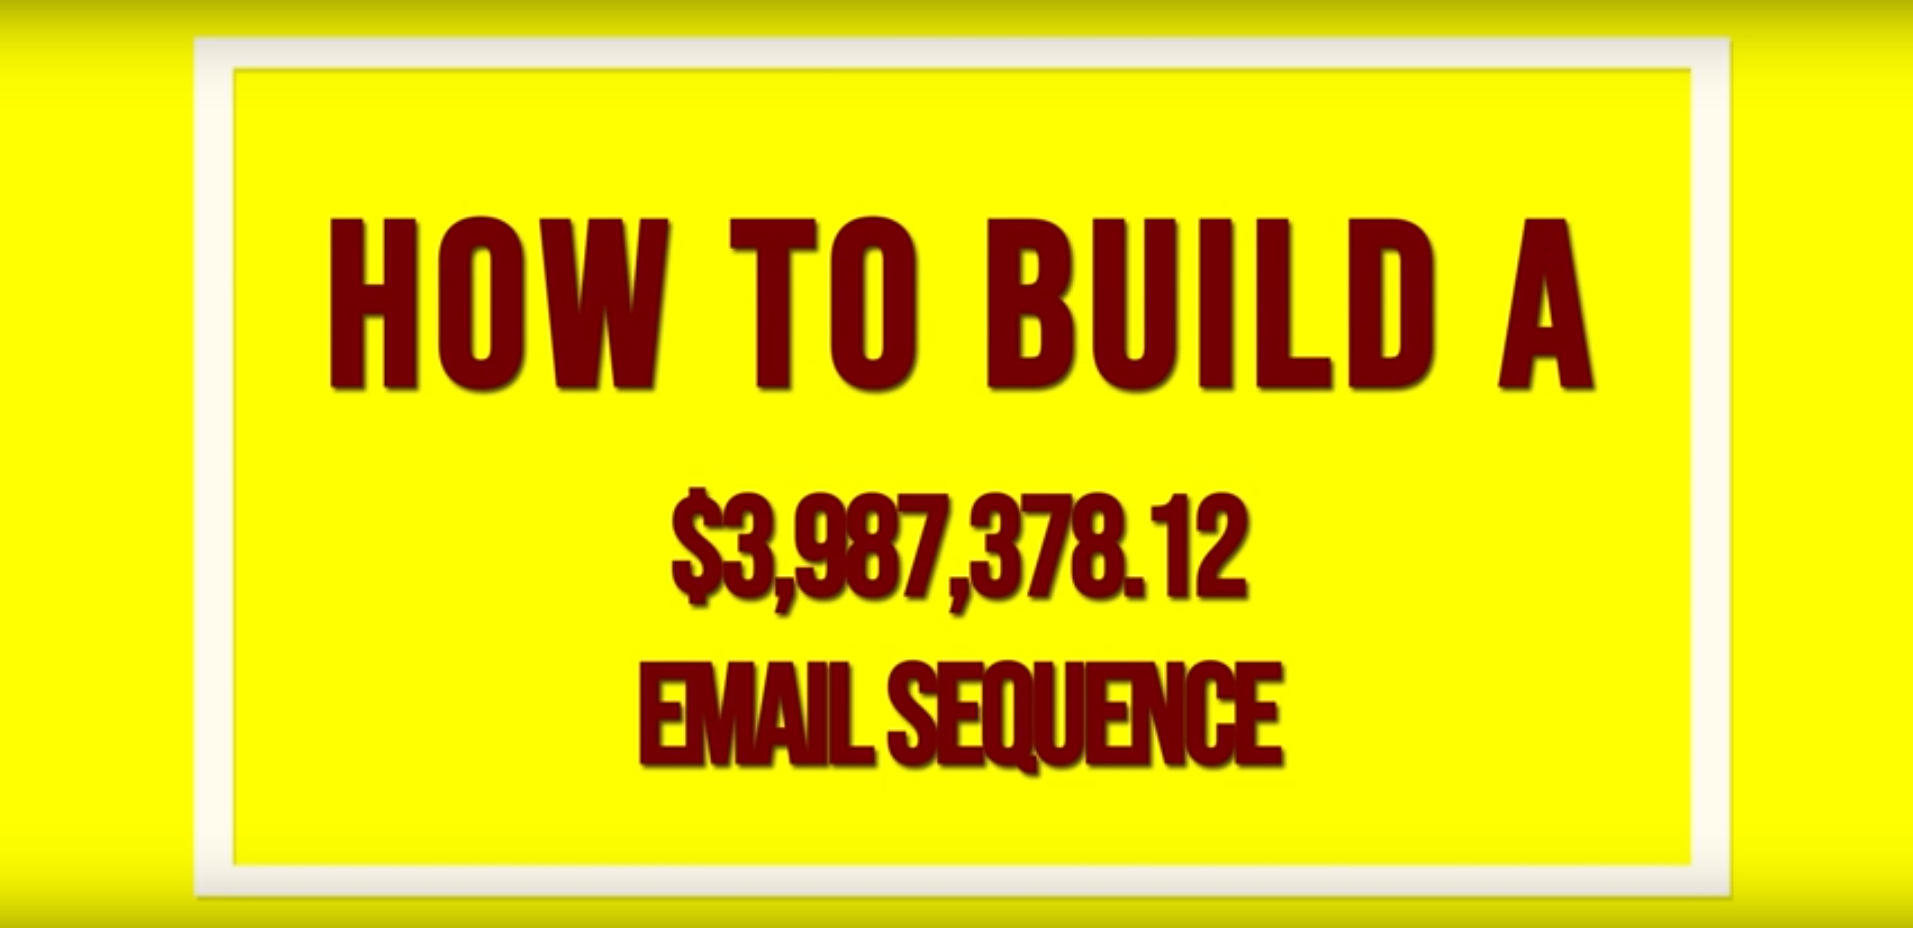 How to build a $3,987,378.12 email sequence